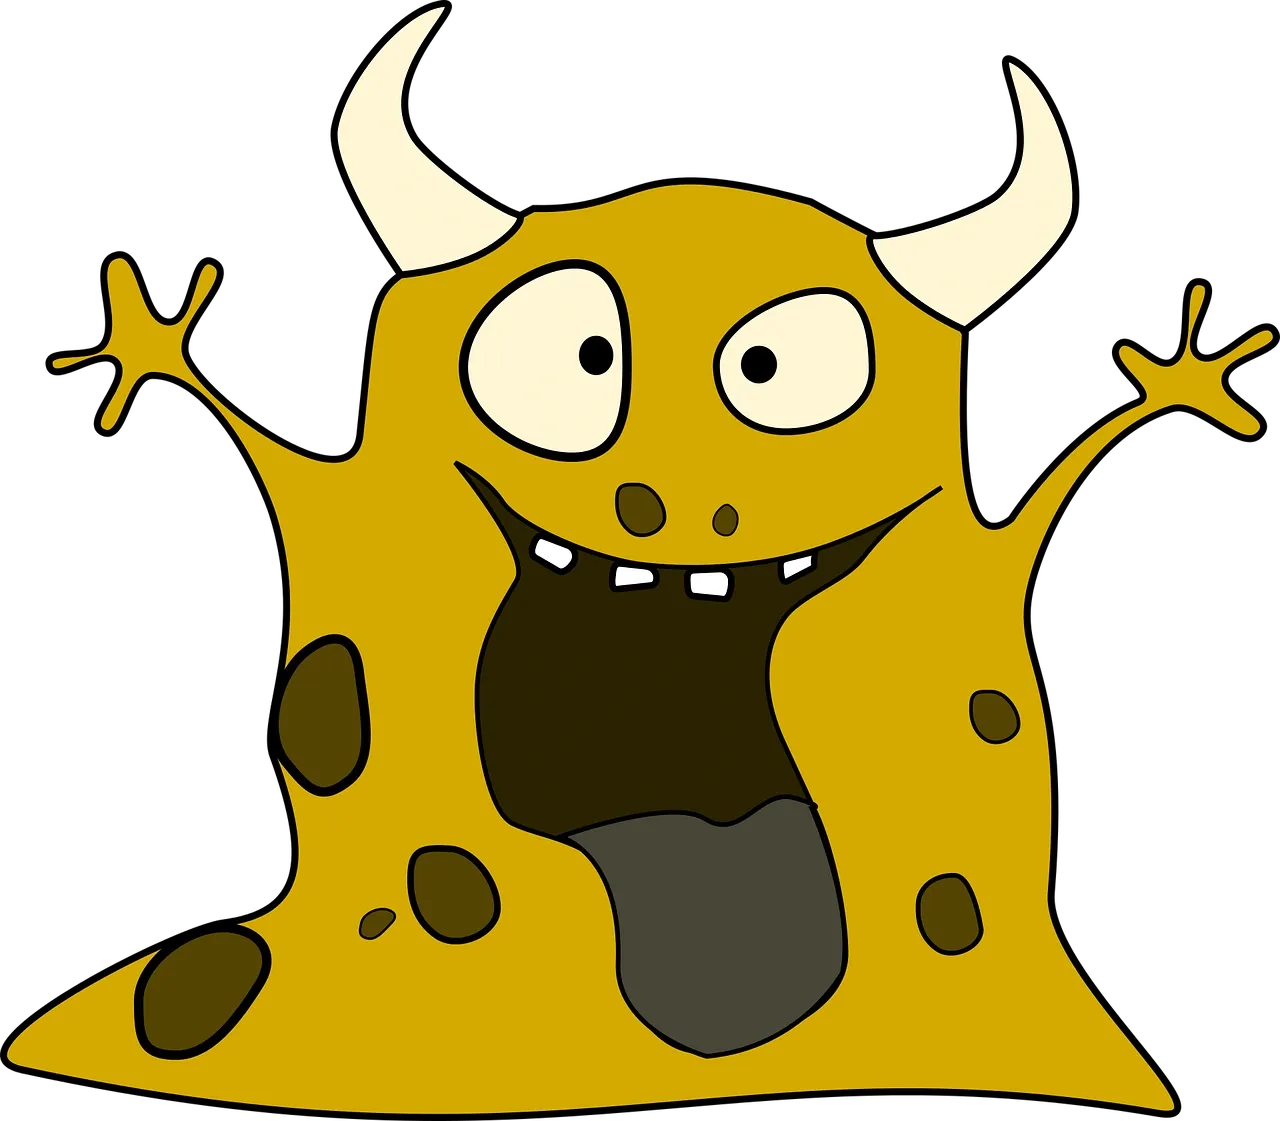 A cartoon of a yellow monster with horns.